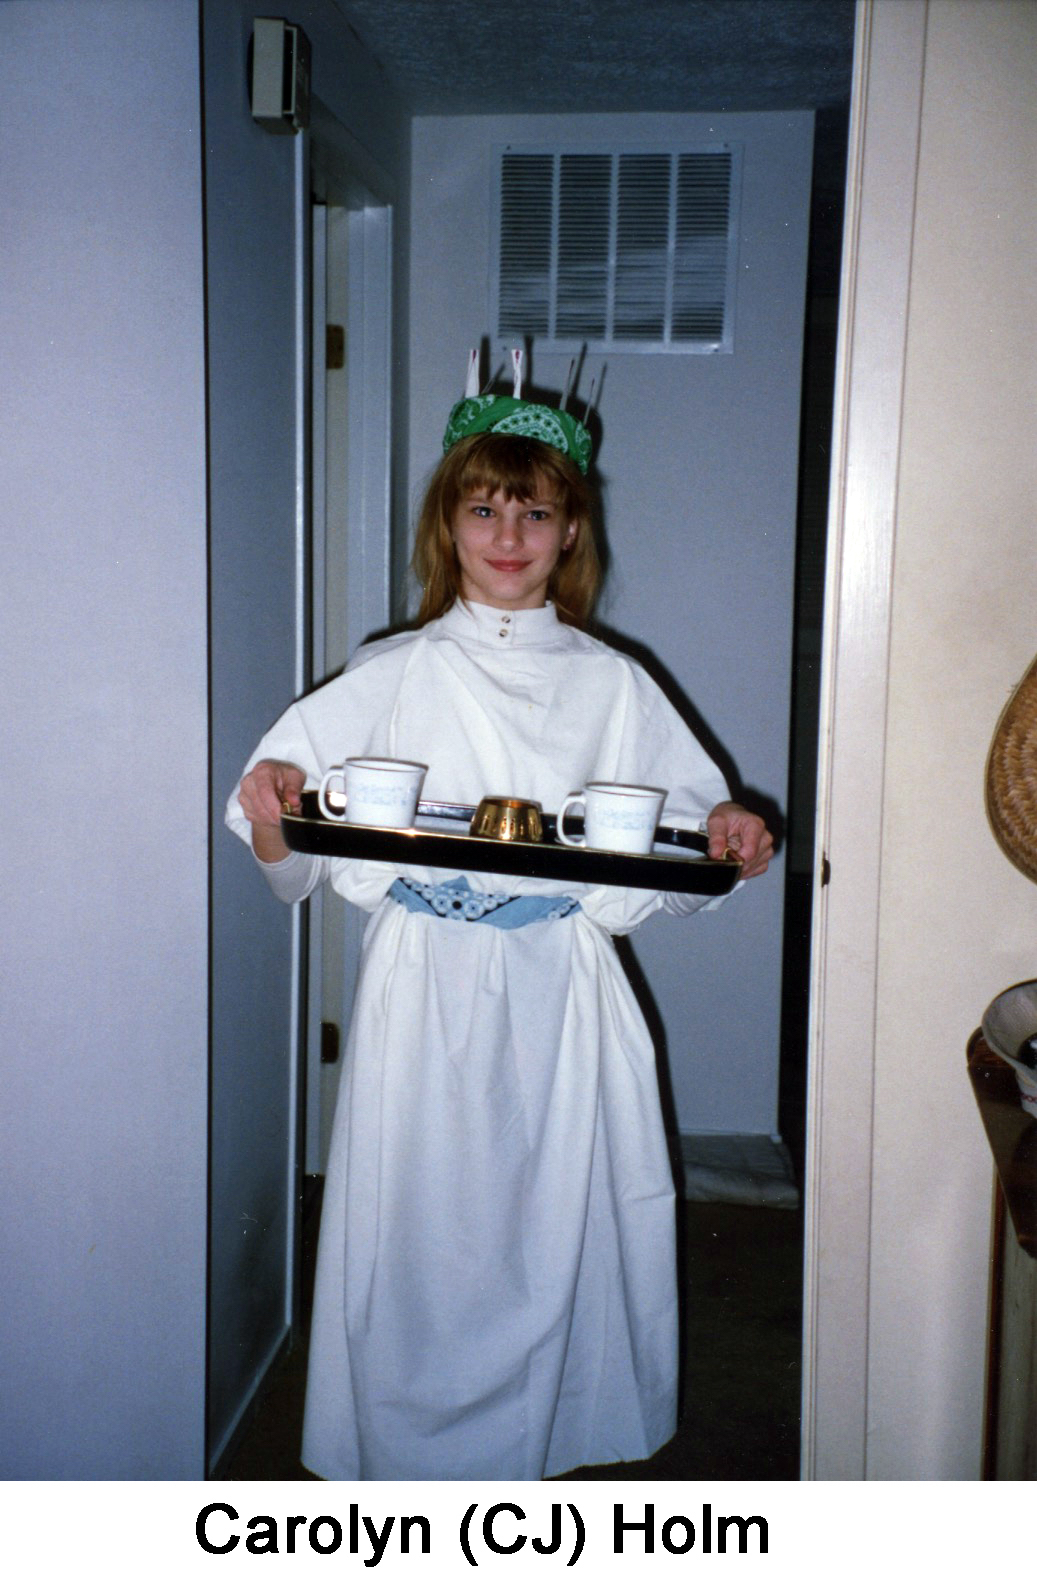 CJ is carrying a tray with two cups and wearing a crown with immitation candles.